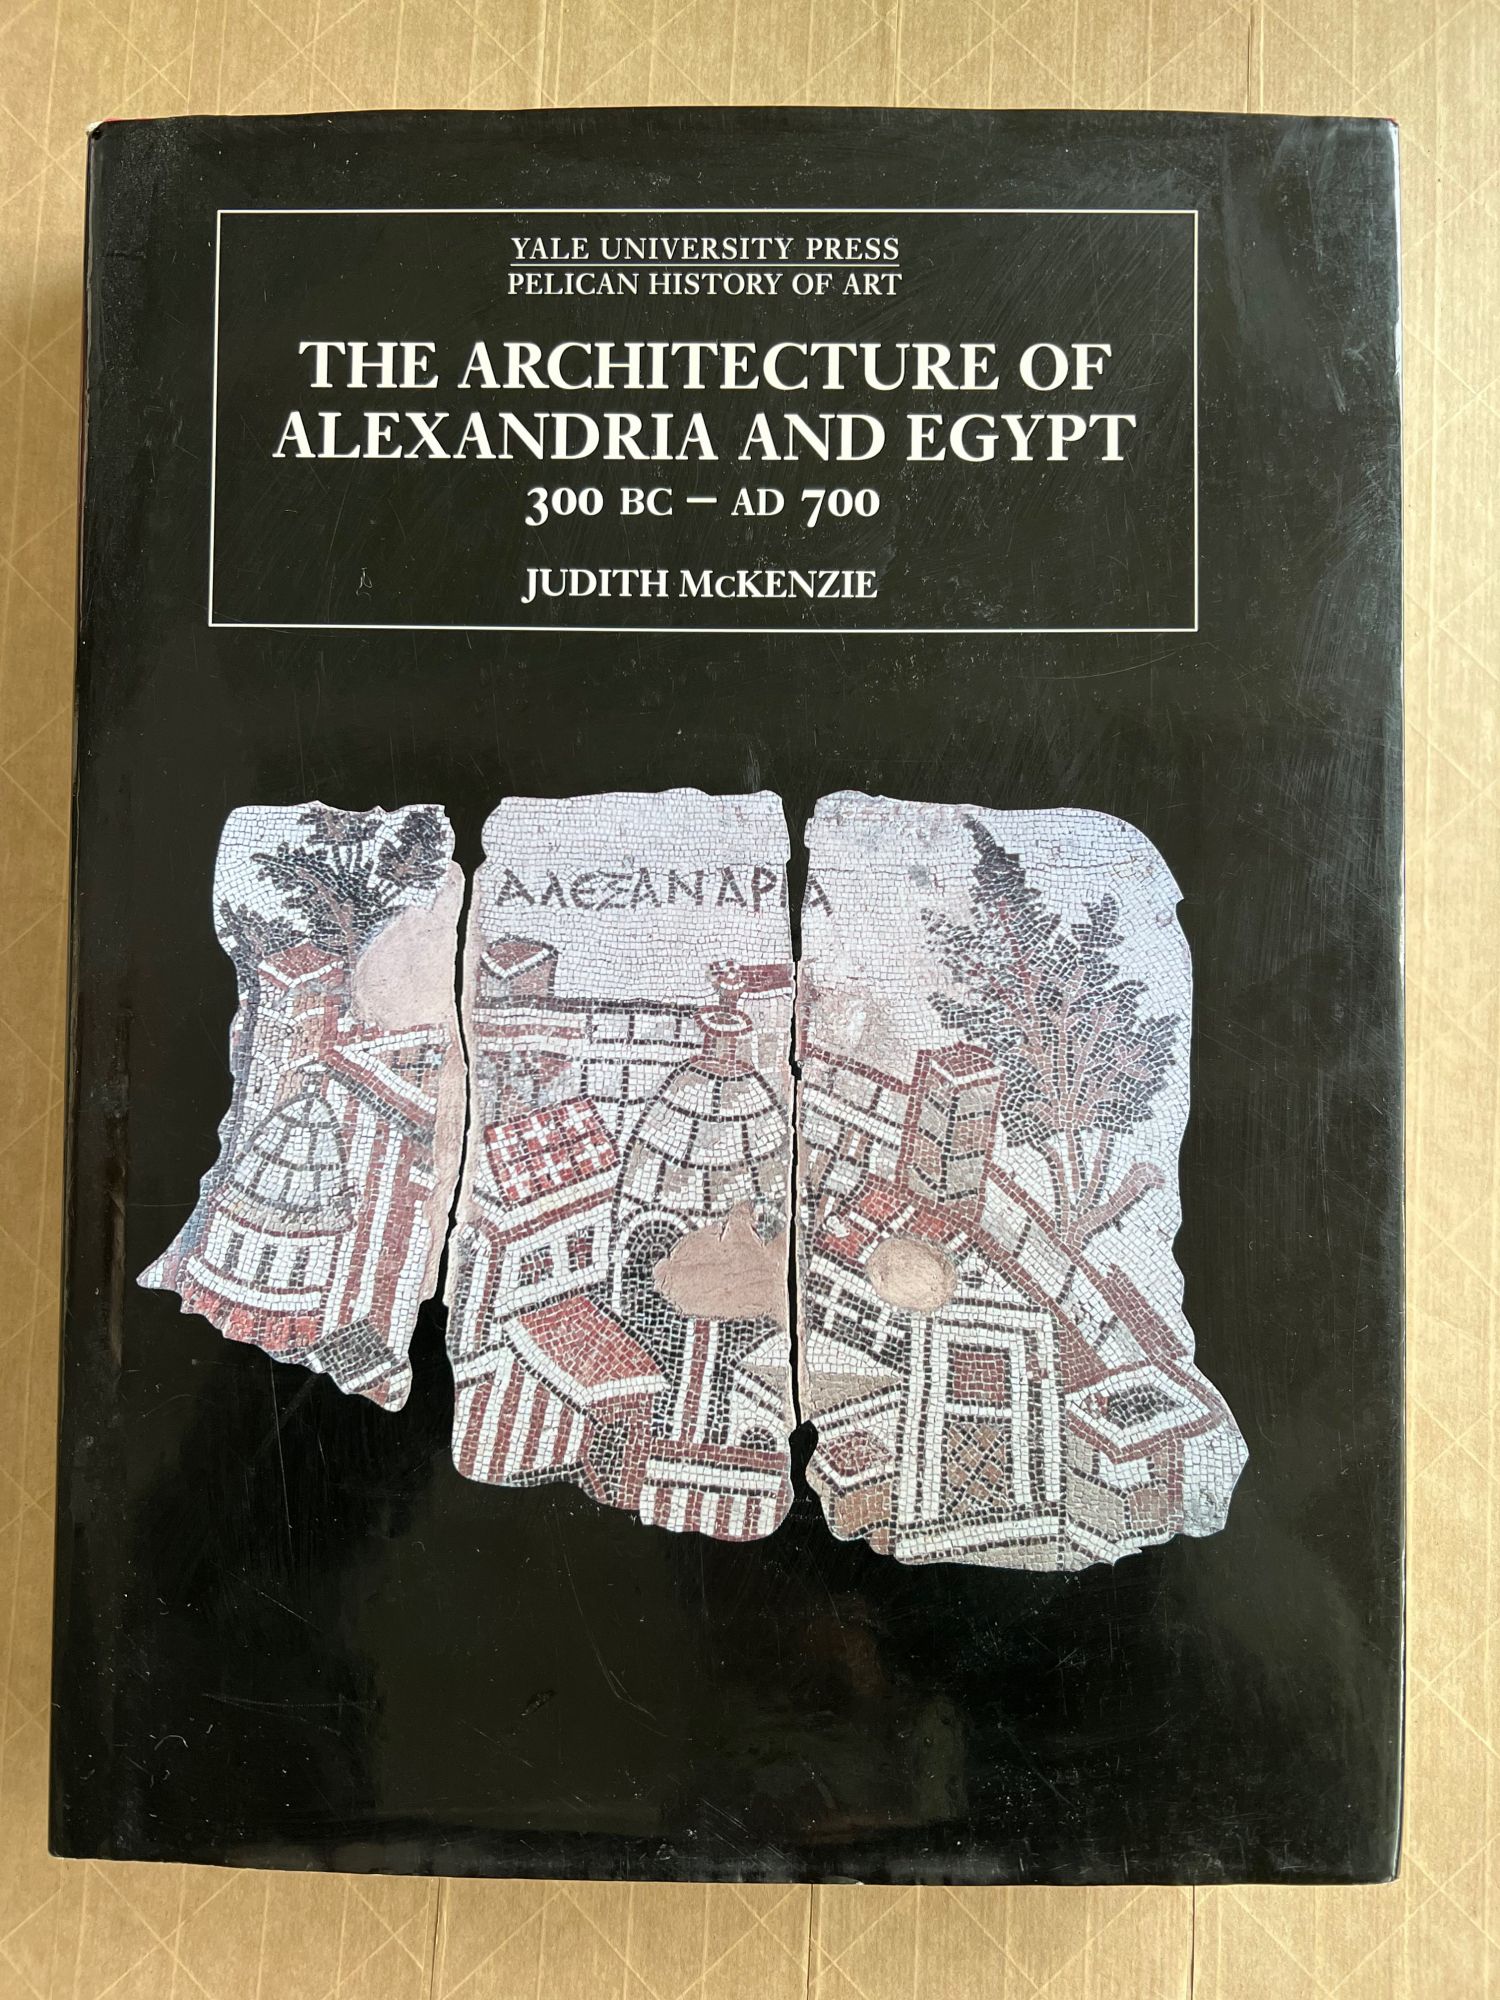 The architecture of Alexandria and Egypt, c. 300 B.C. to A.D. 700 - McKenzie, Judith